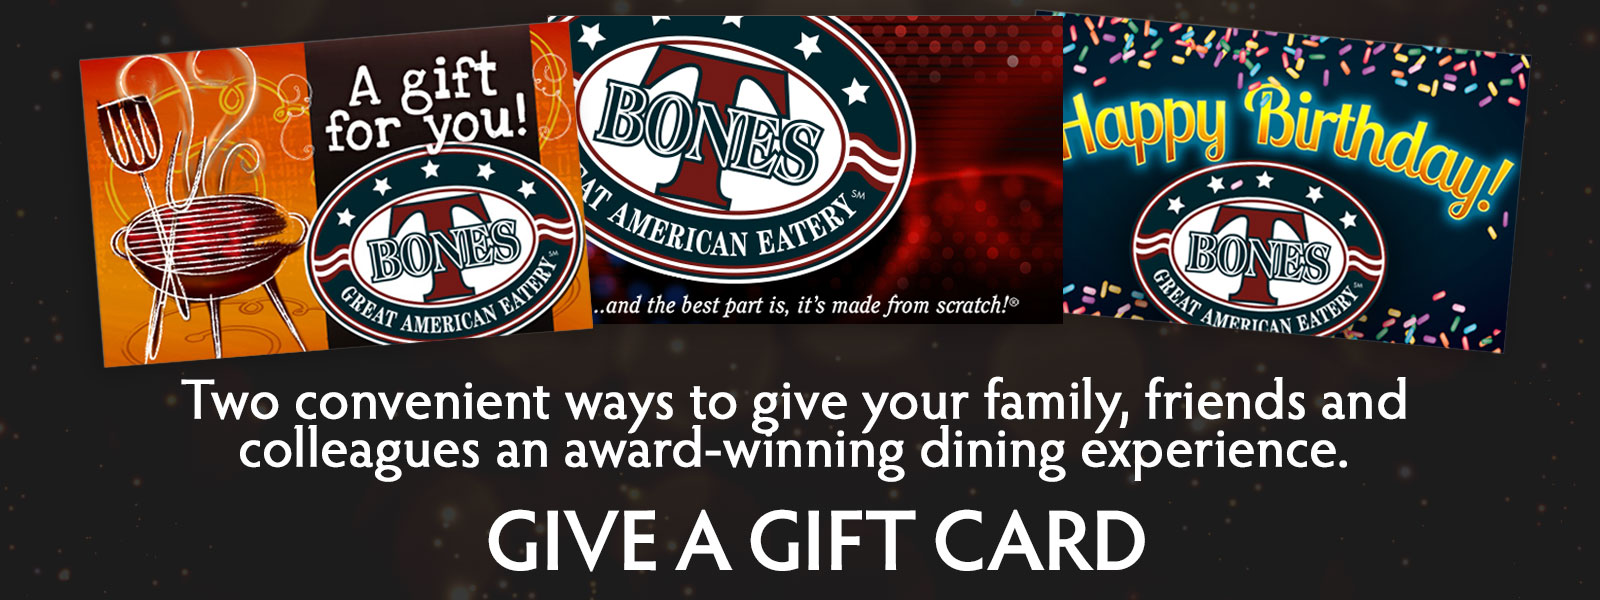 T-BONES Great American Eatery: Gift Cards